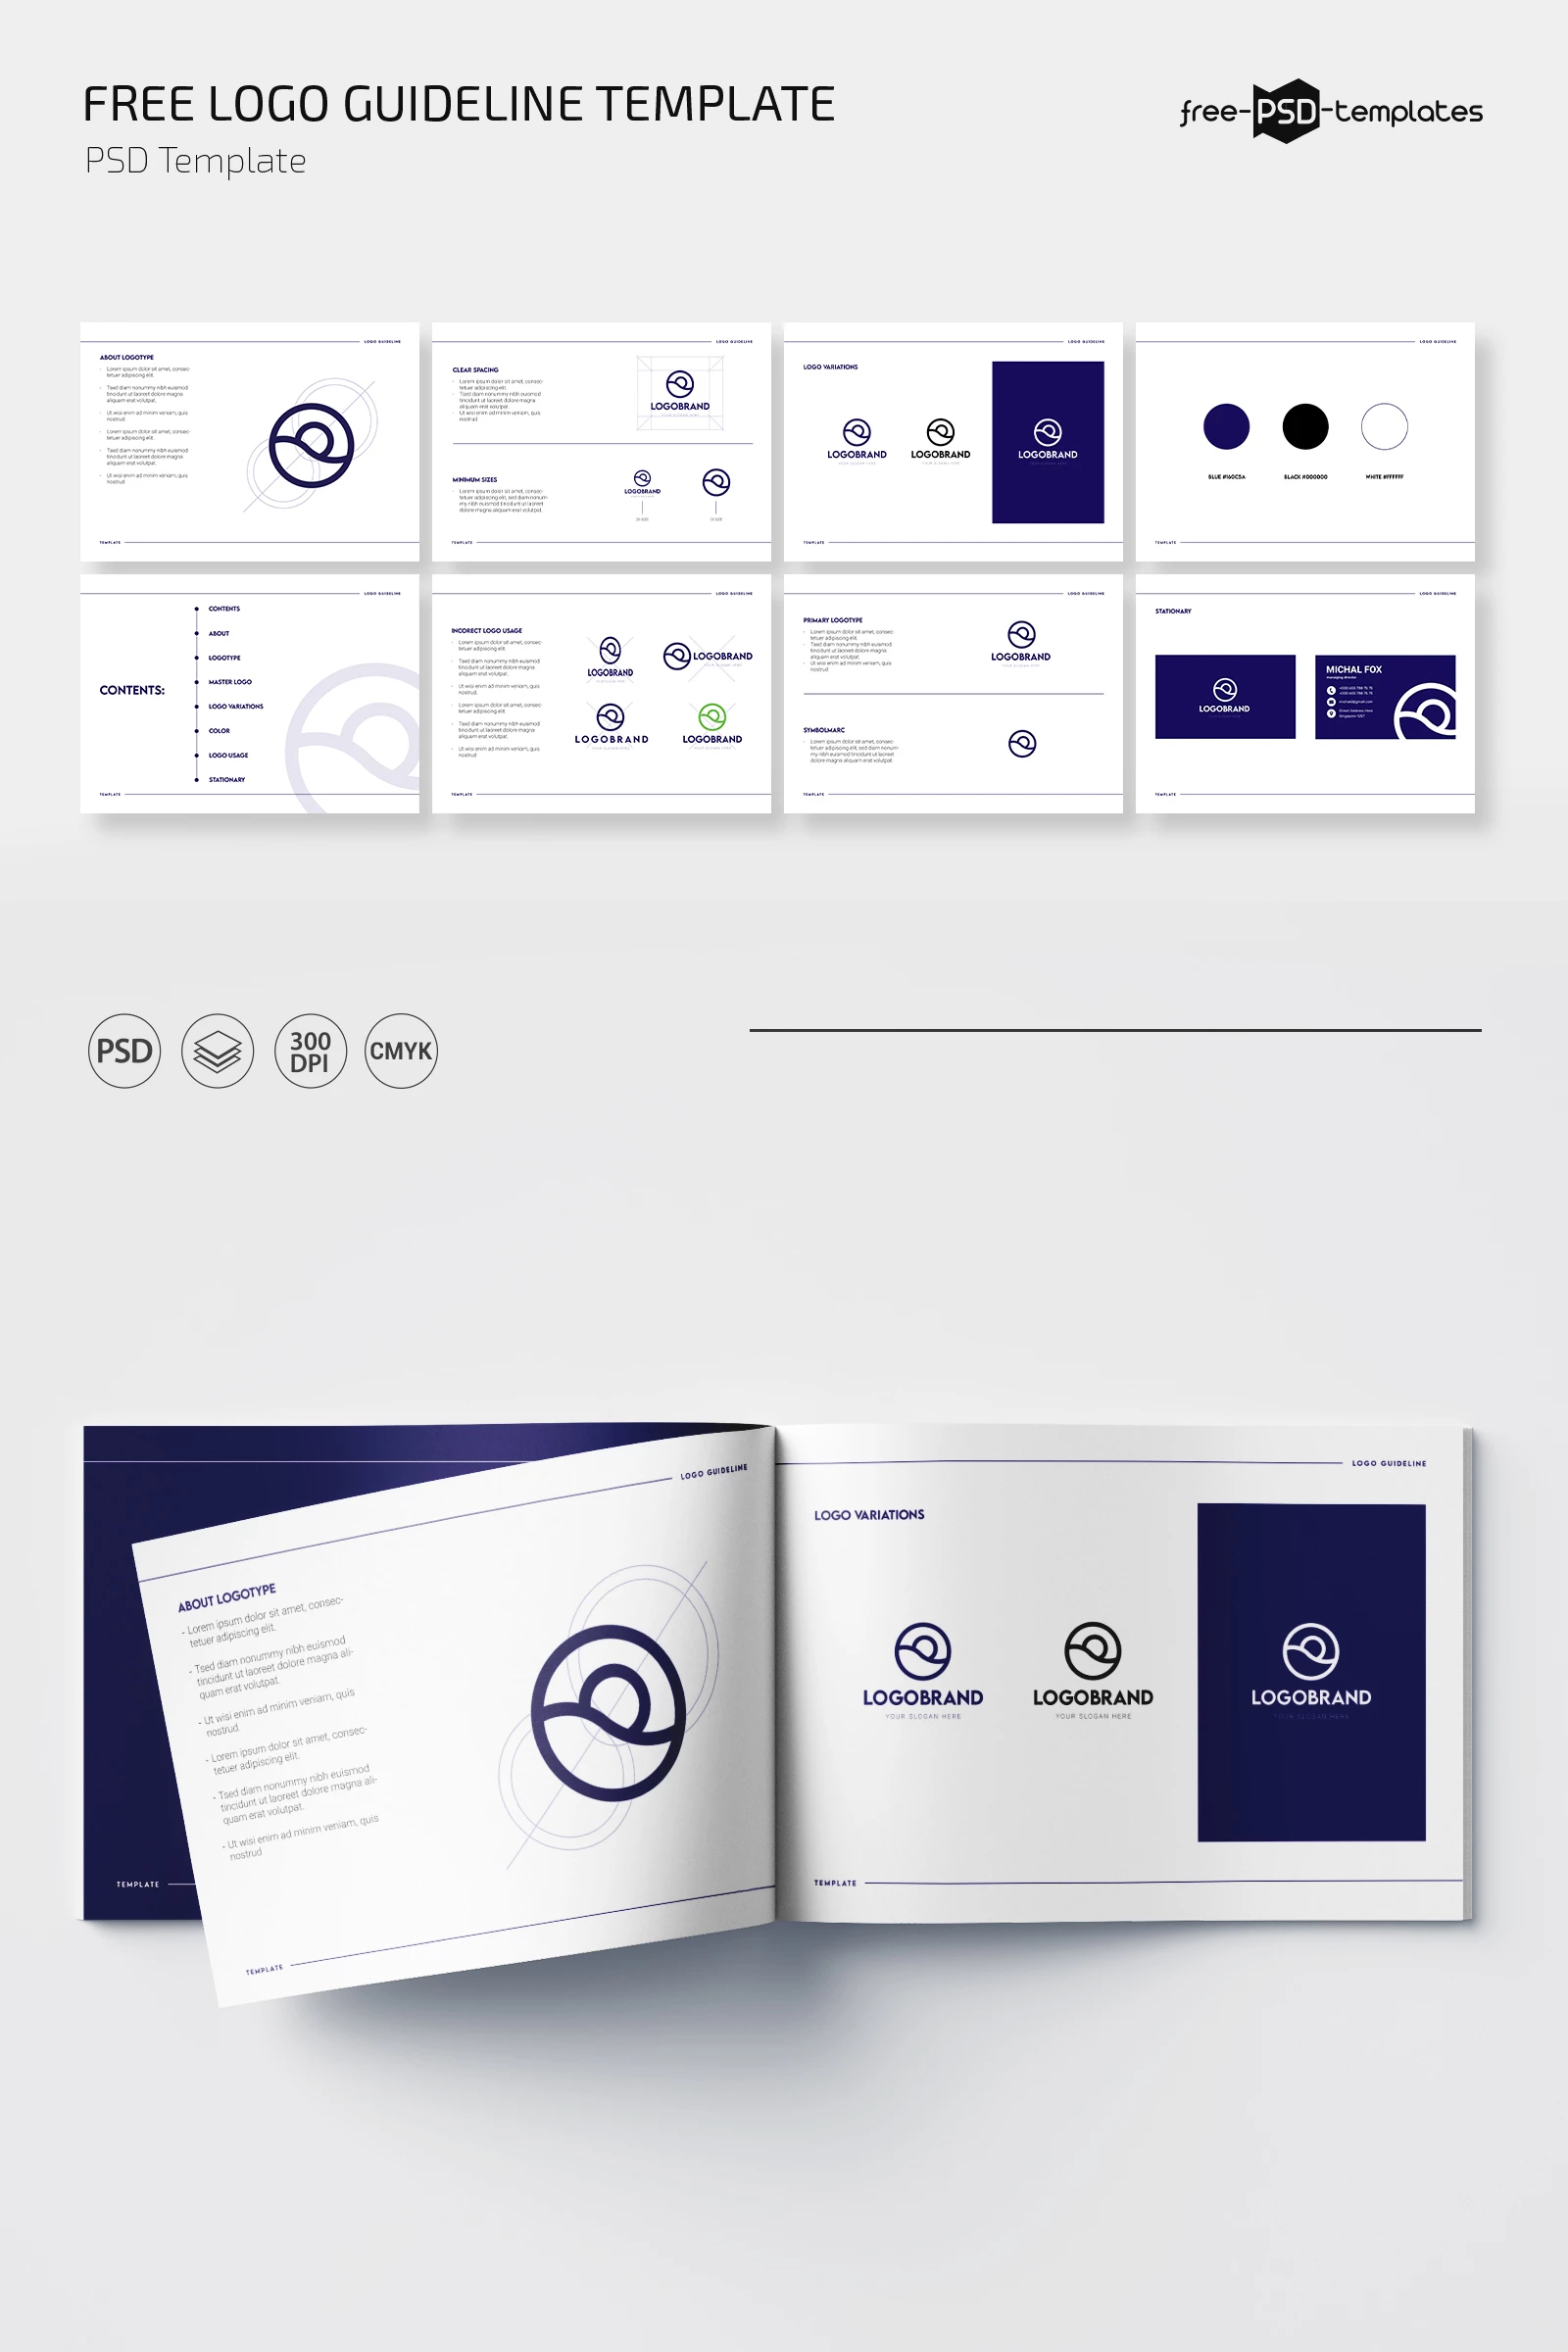 Free Logo Guideline Template